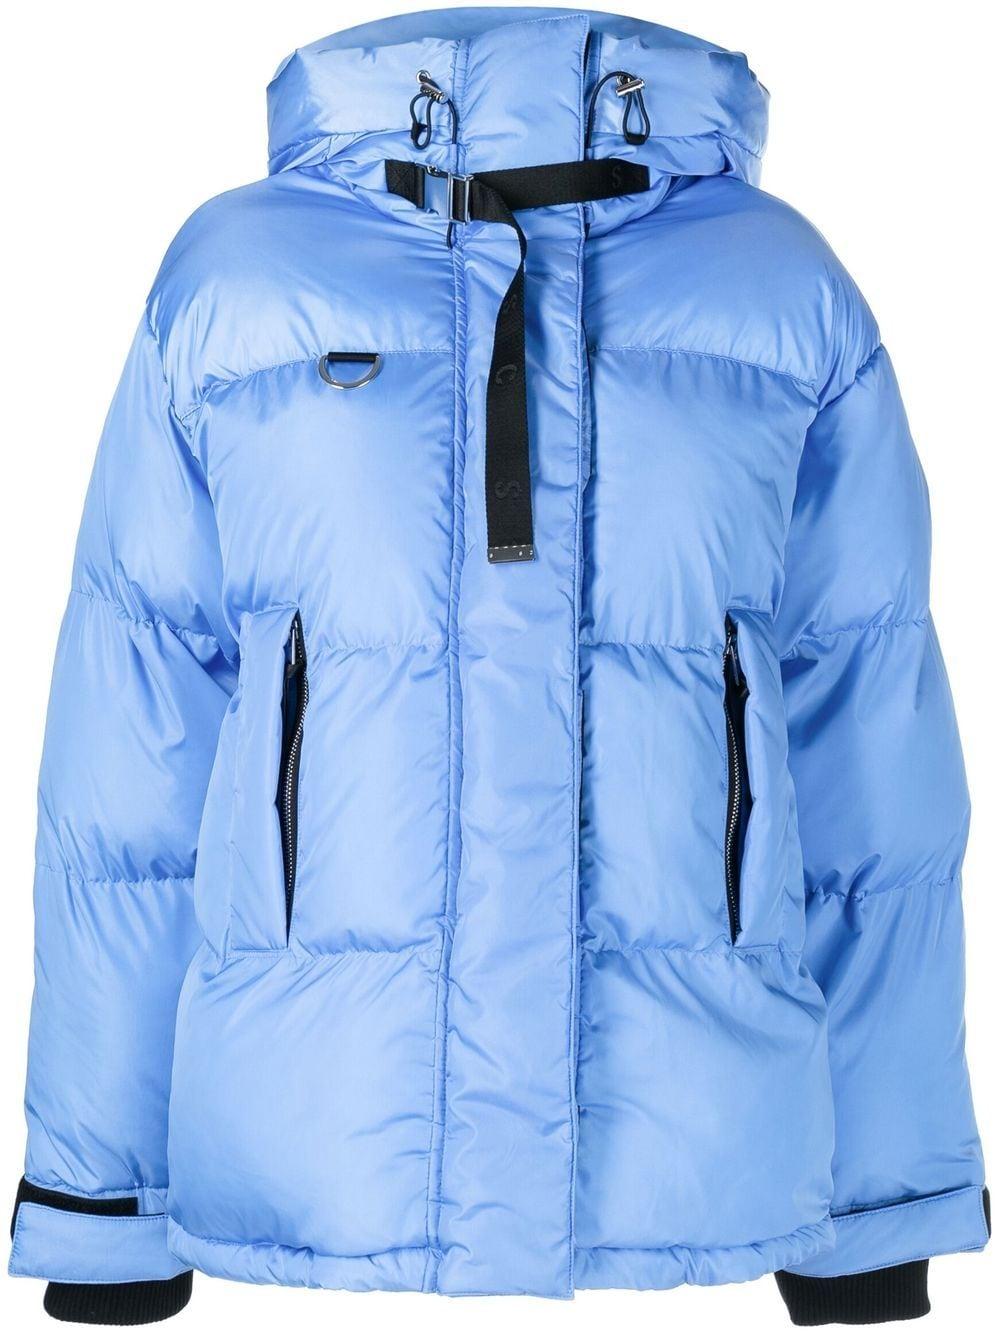 SHOREDITCH SKI CLUB Willow Oversized Hooded Puffer Jacket in Blue | Lyst